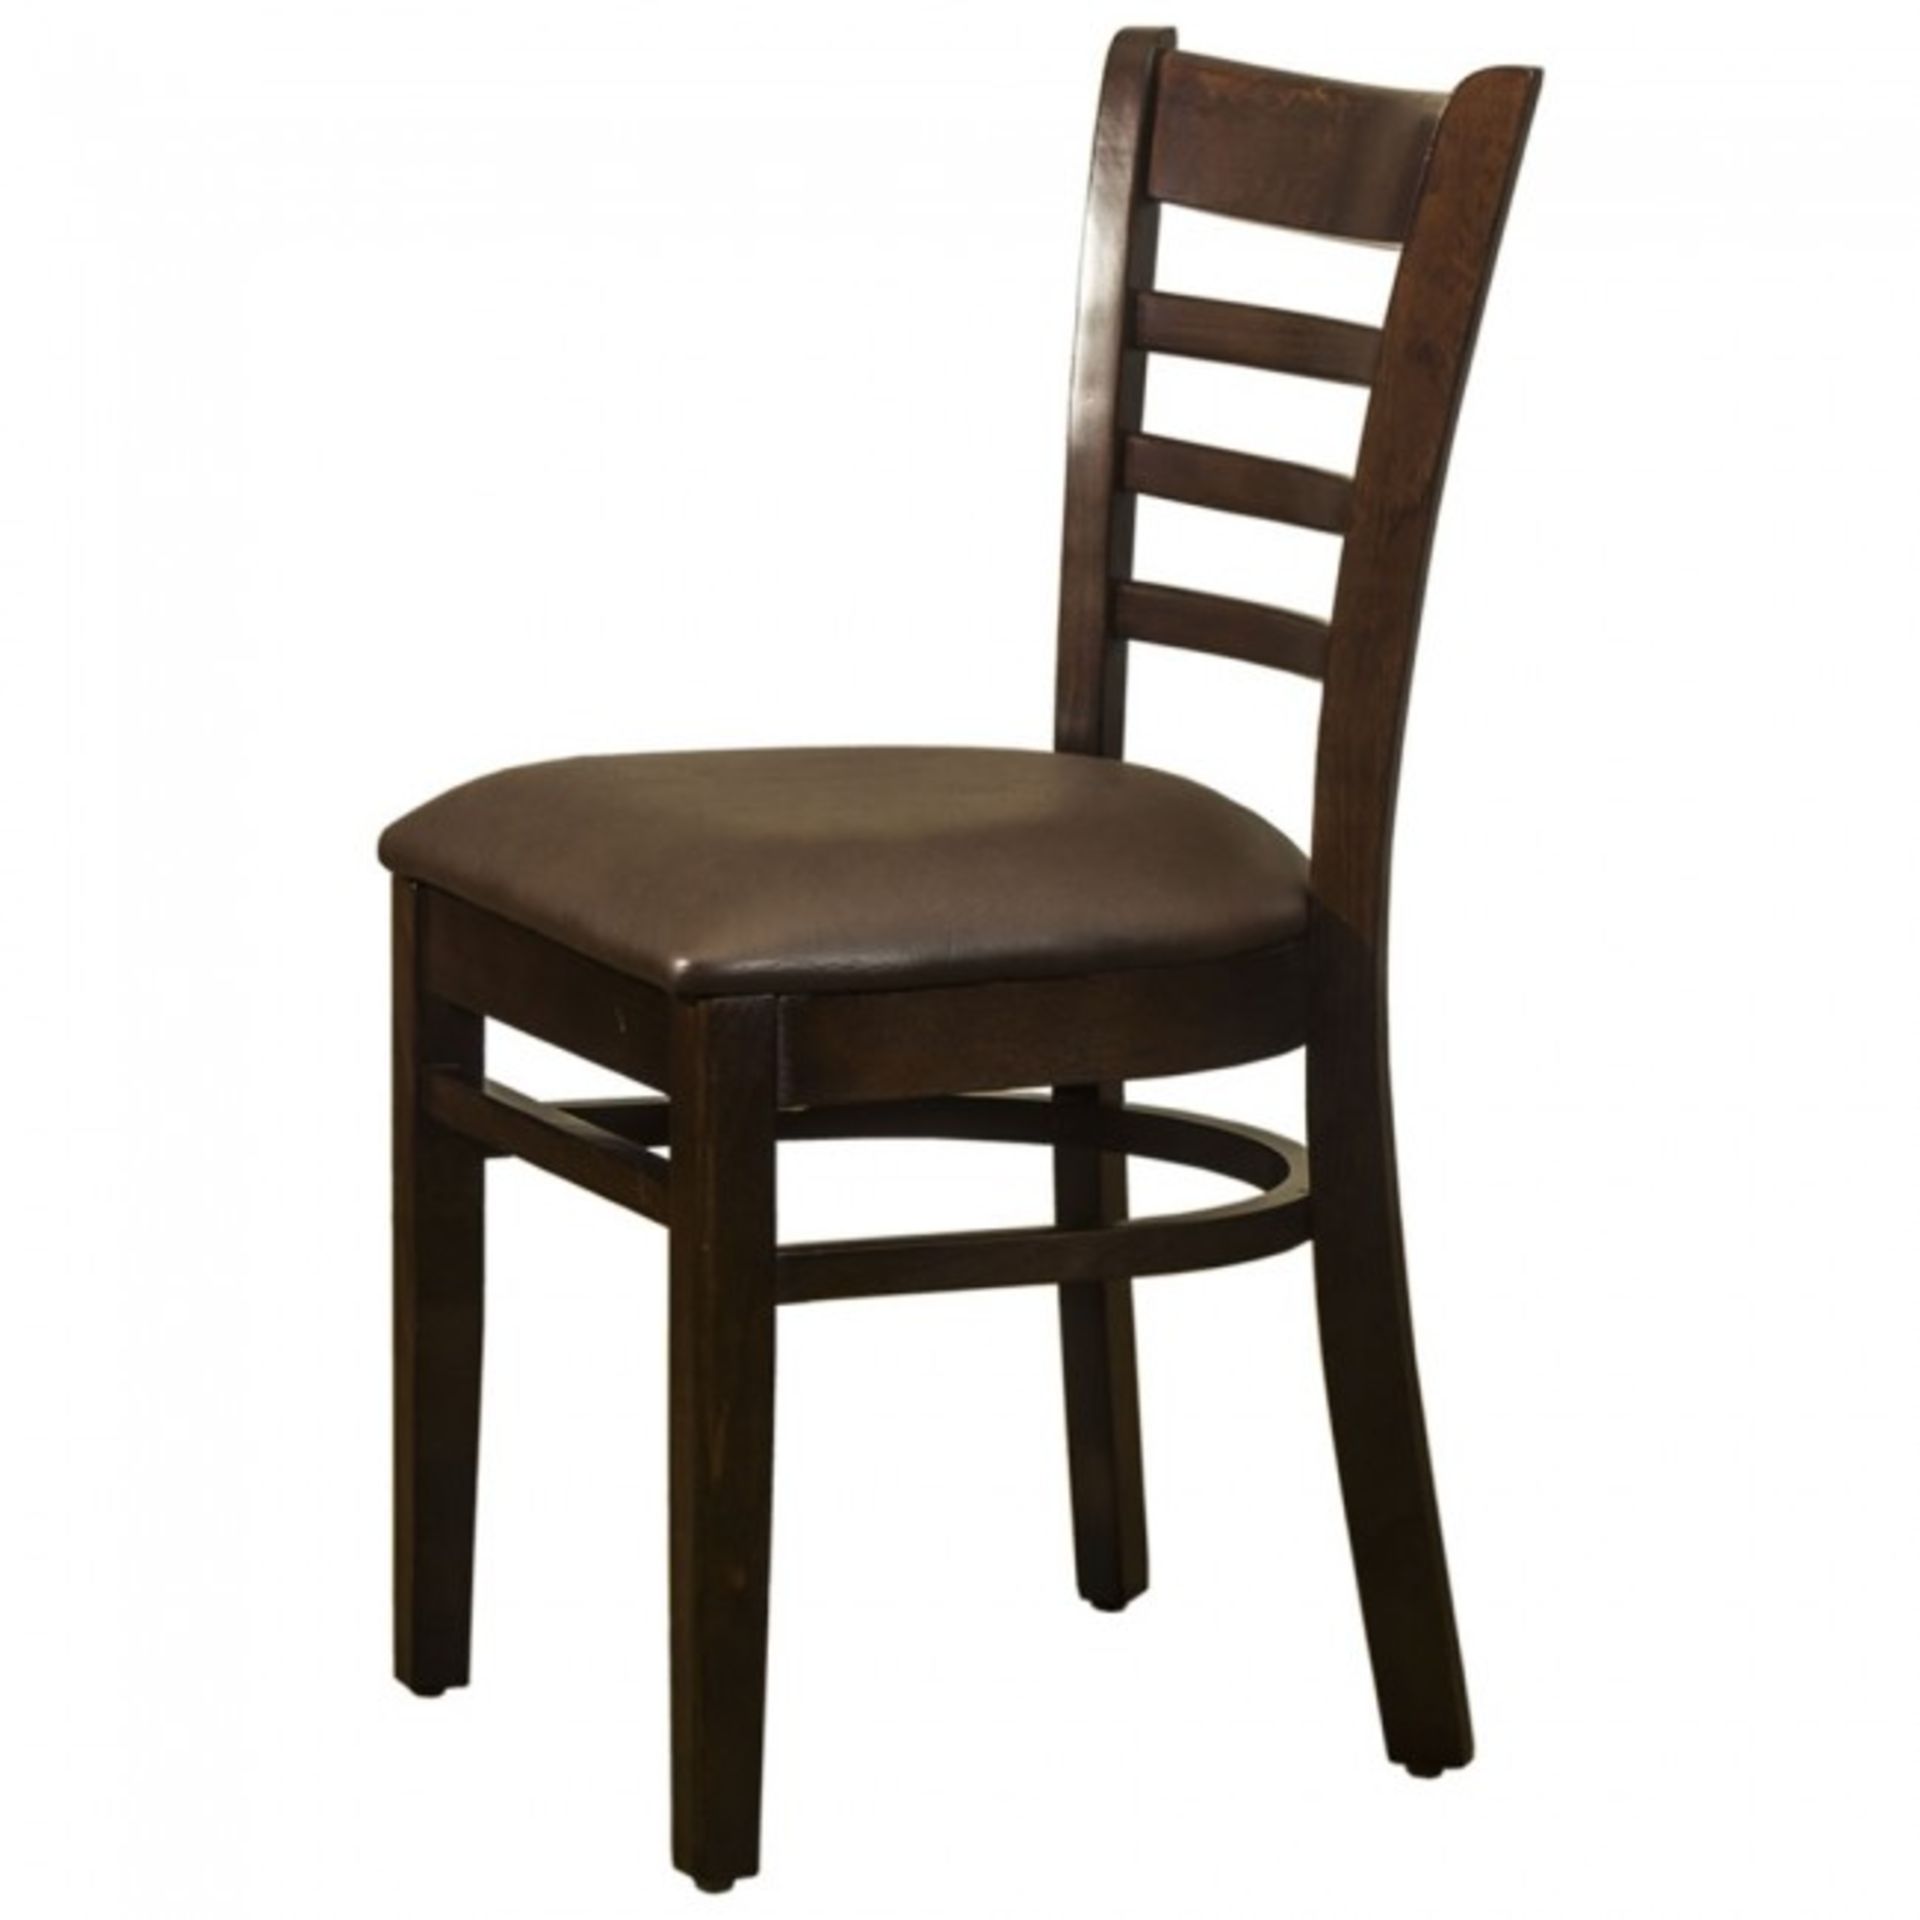 10 x Brand New Restaurant Chair - Walnut Finish - Solid Beech Frame with Brown Faux Leather seat - Image 2 of 4